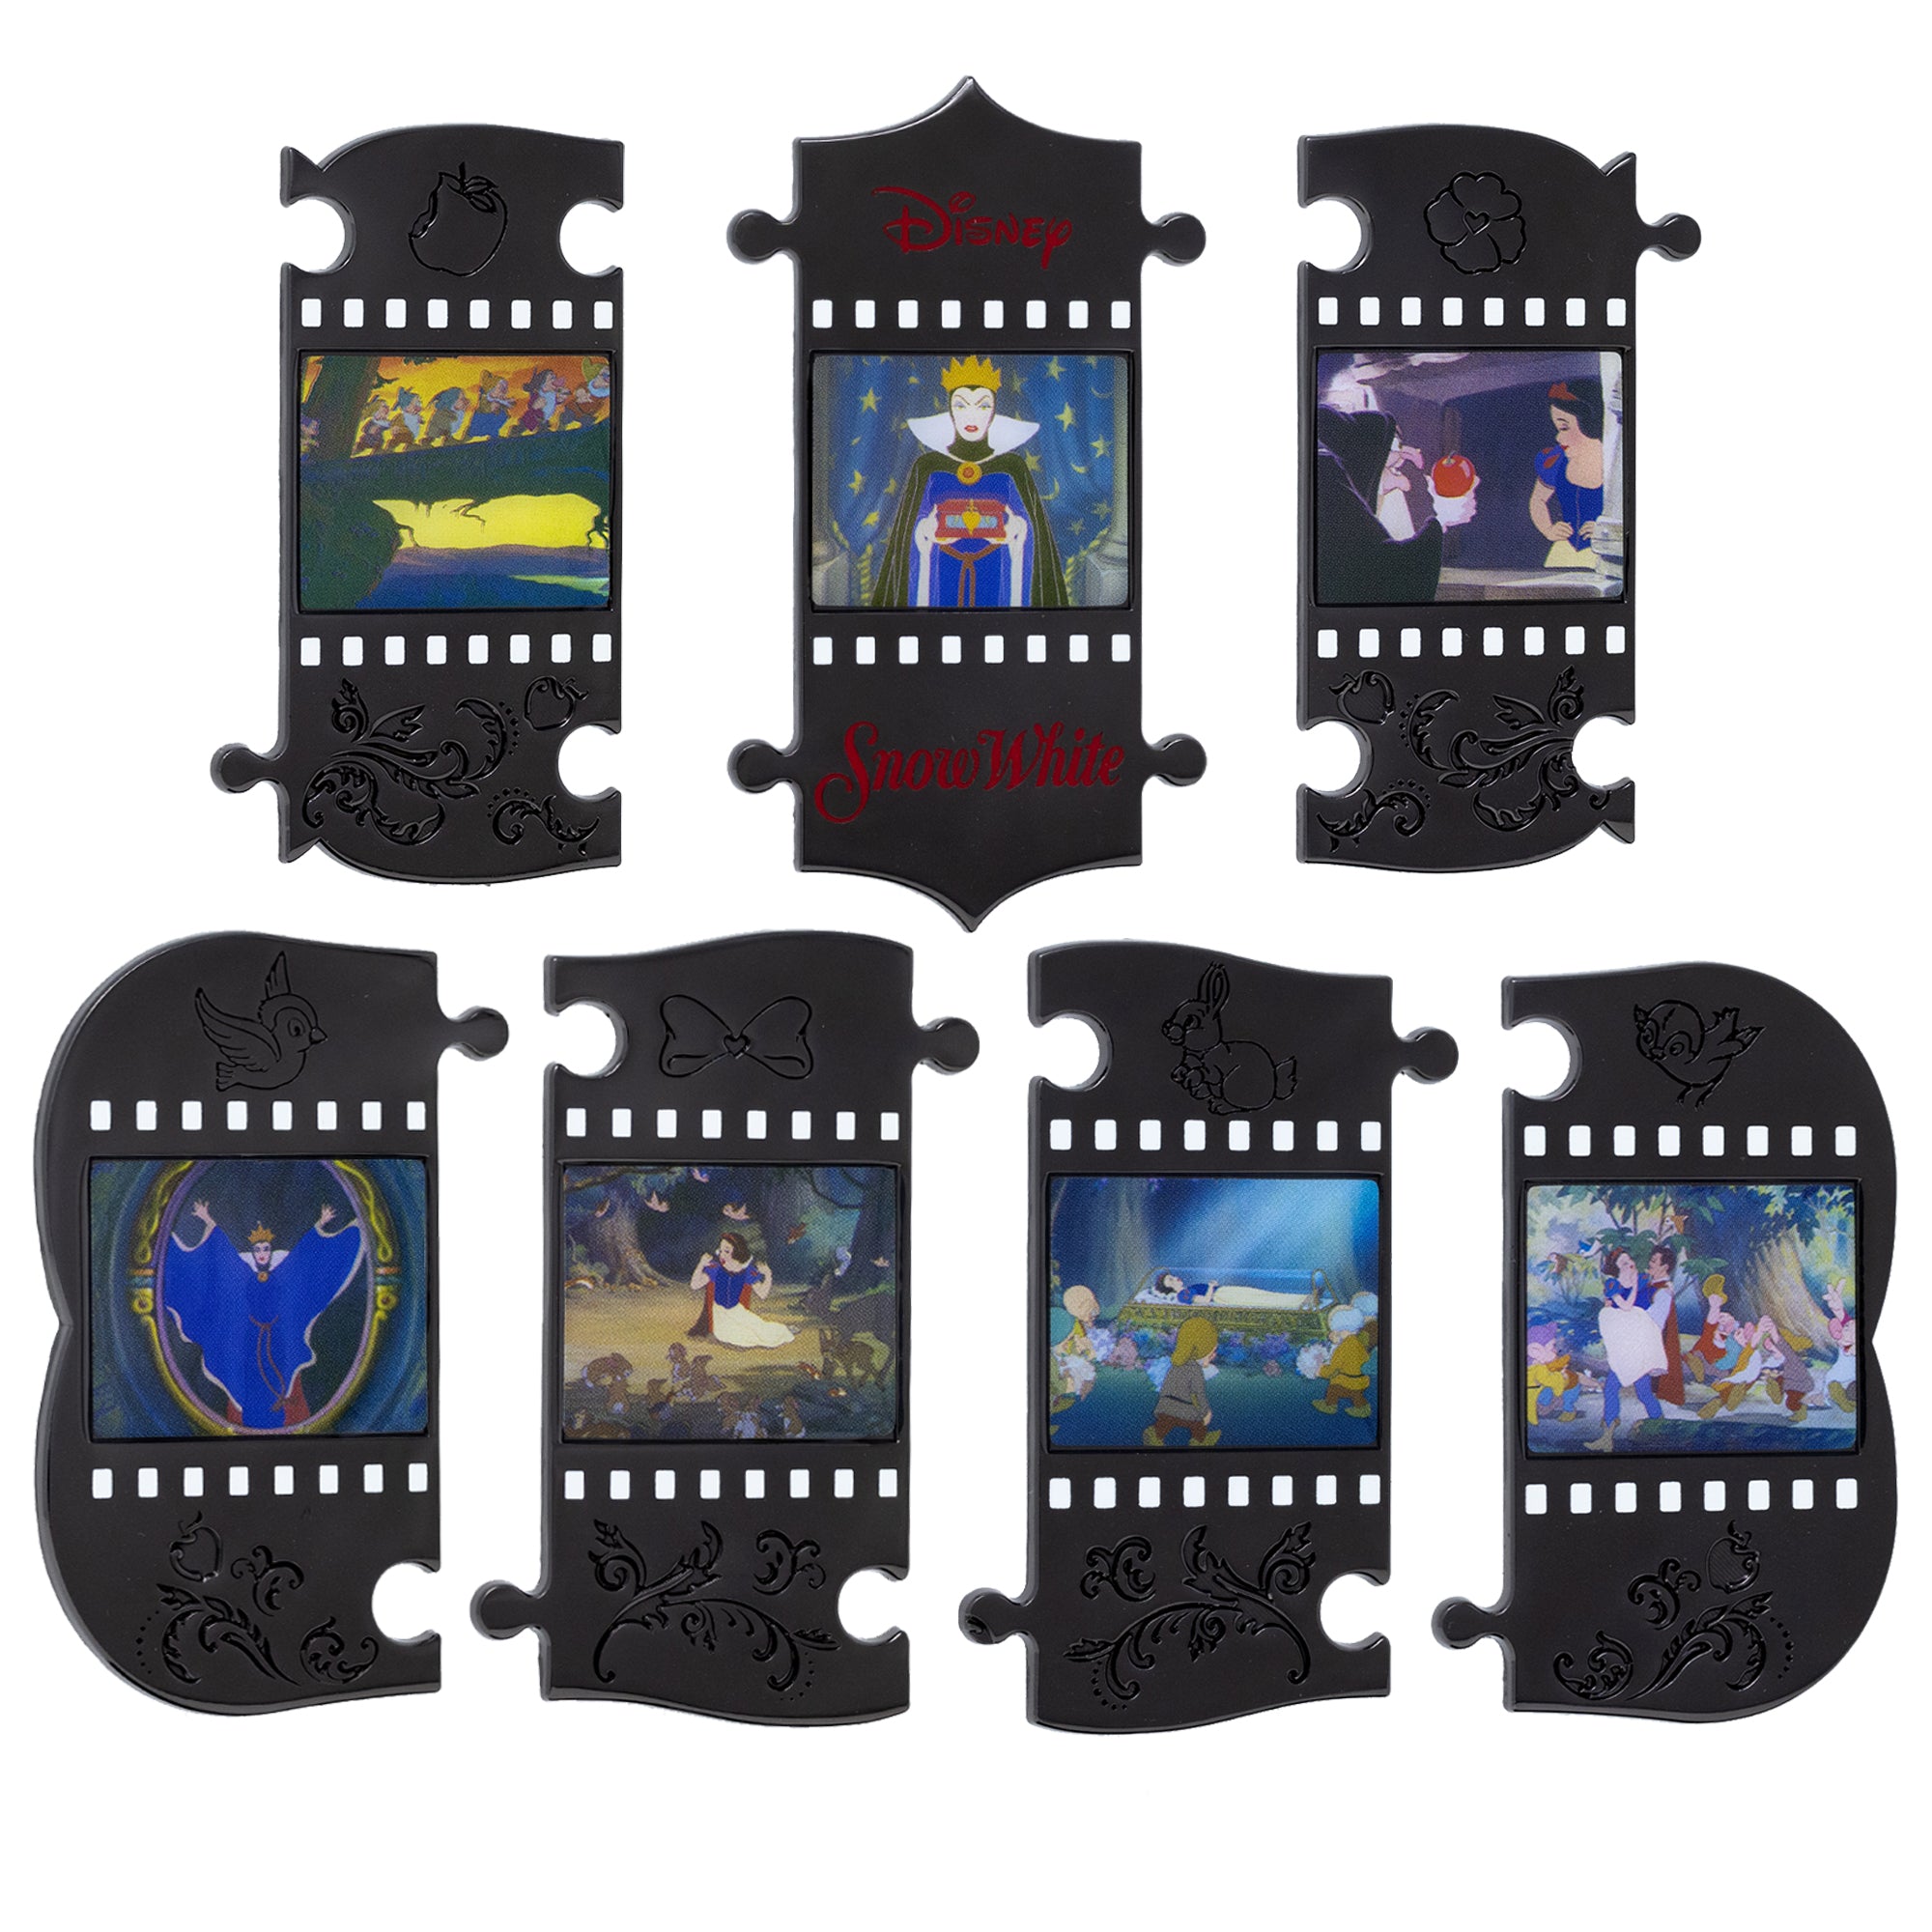 Disney Snow White & the Seven Dwarfs Final Frames Puzzle Pin Series Mystery Surprise Pin - Limited Edition 300 - NEW RELEASE